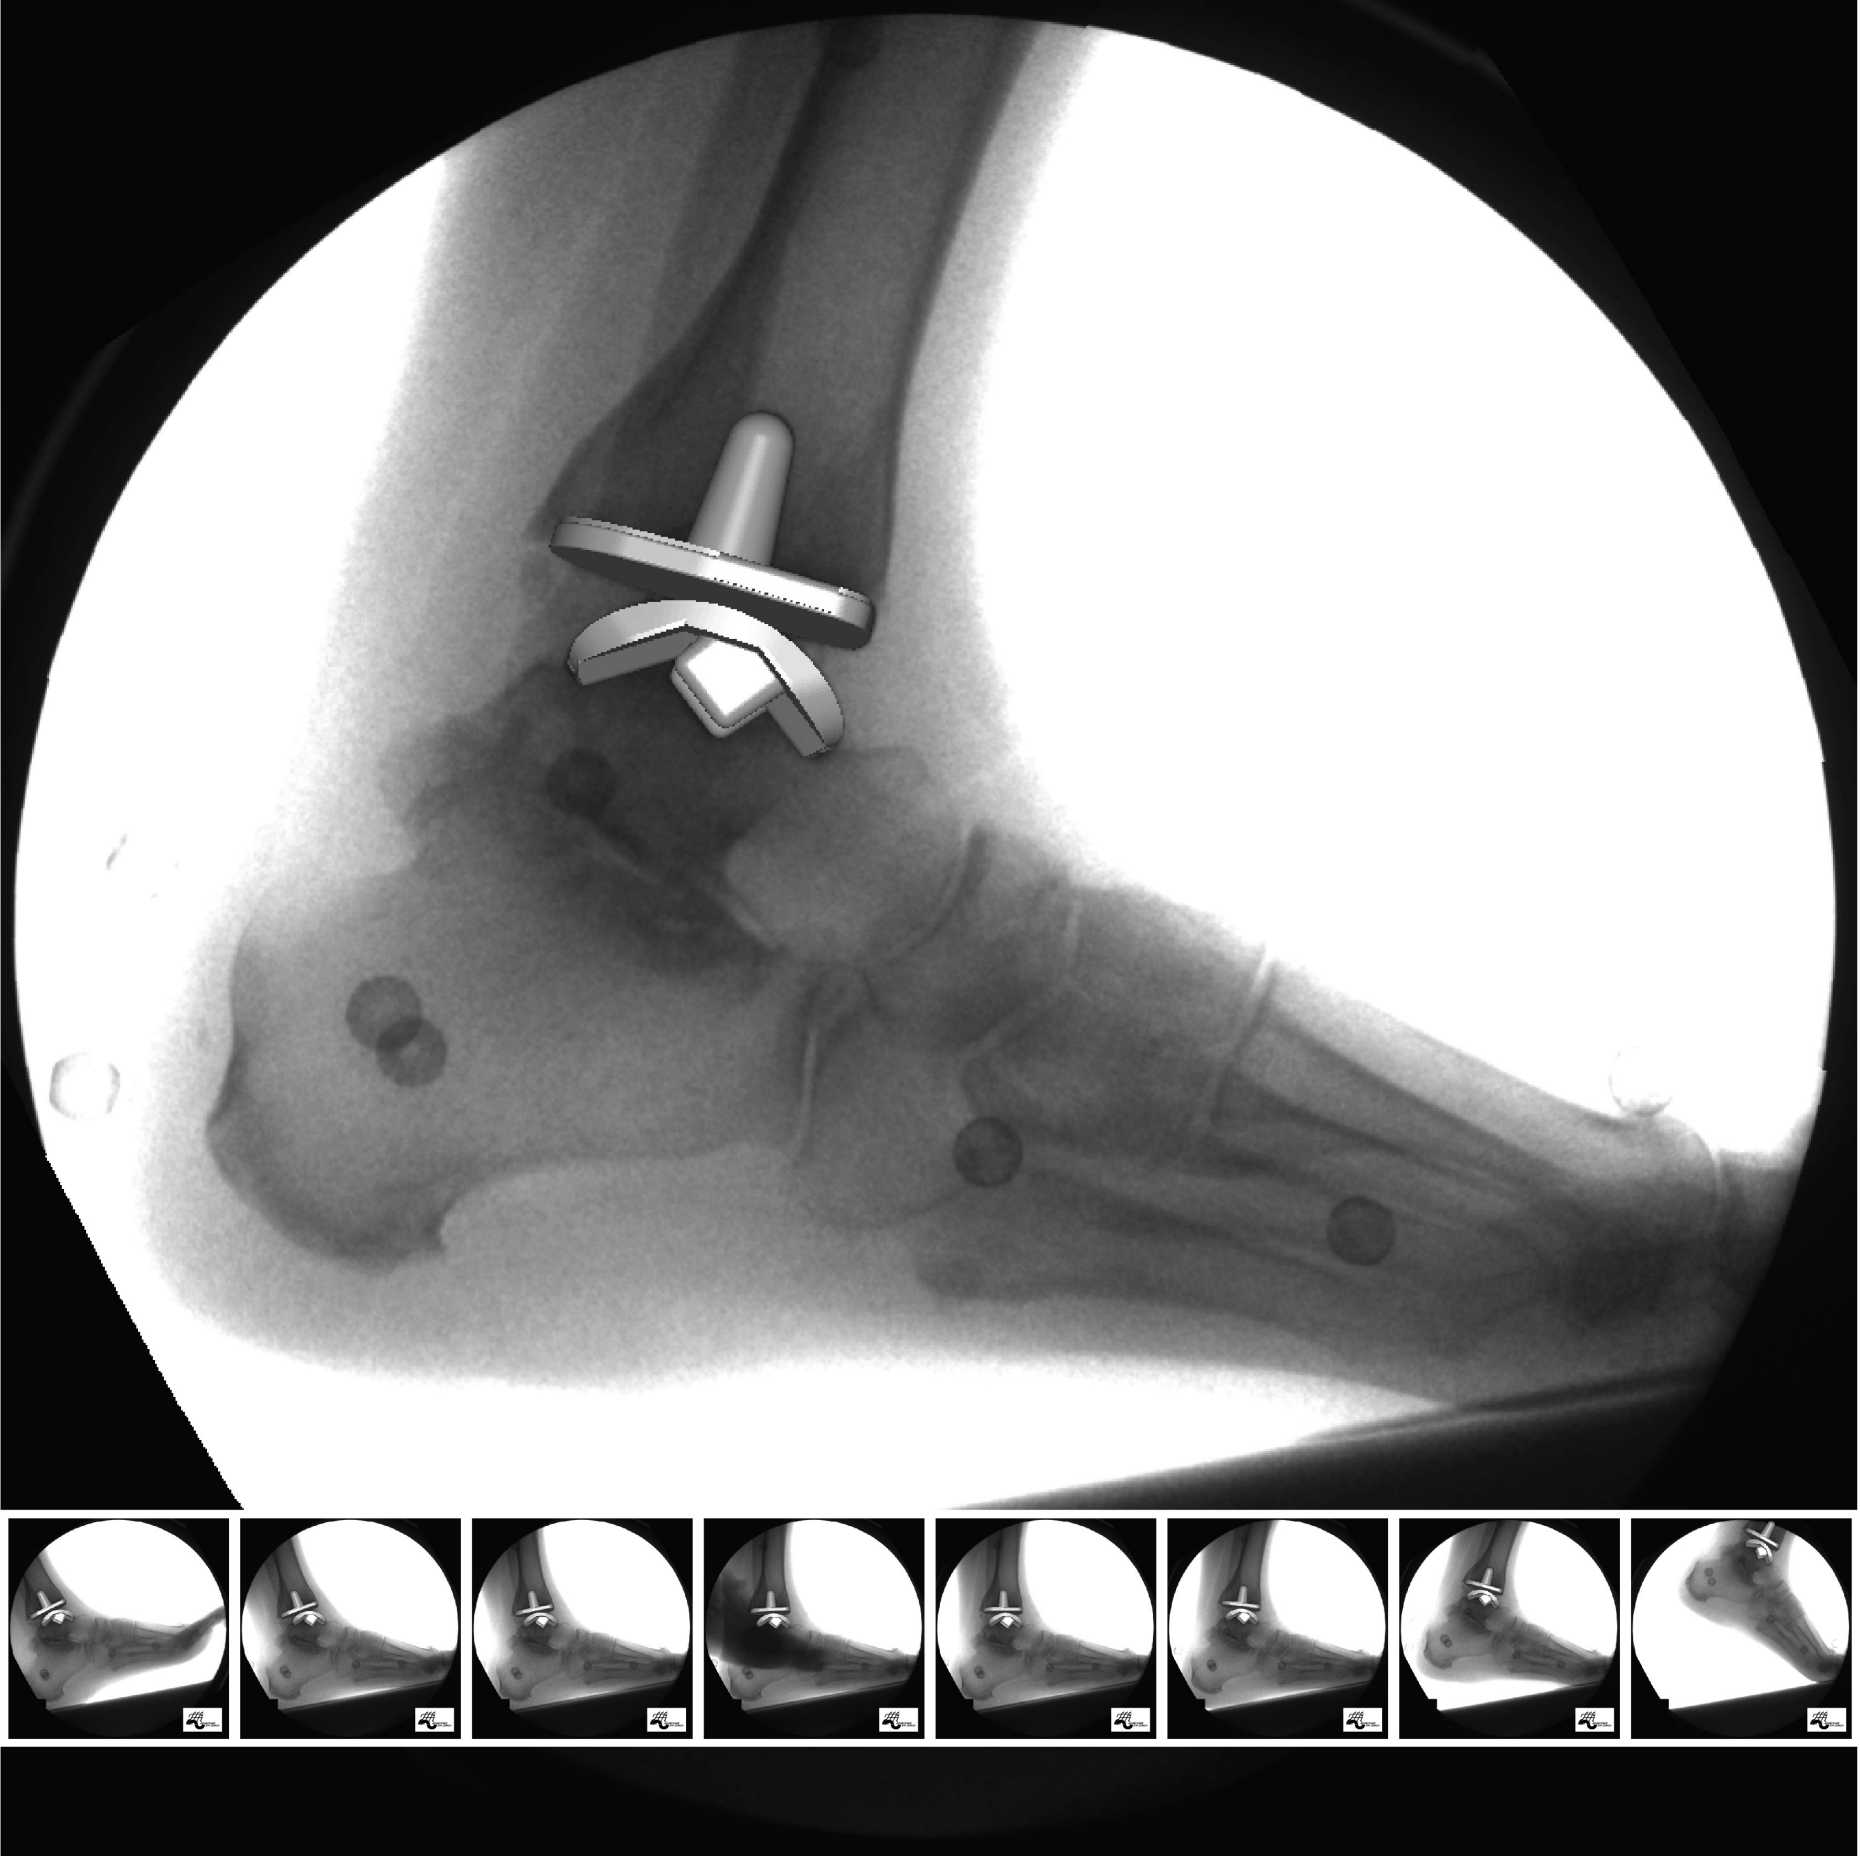 Enlarged view: Total ankle arthroplasty subject during the stance phase of walking uphill 